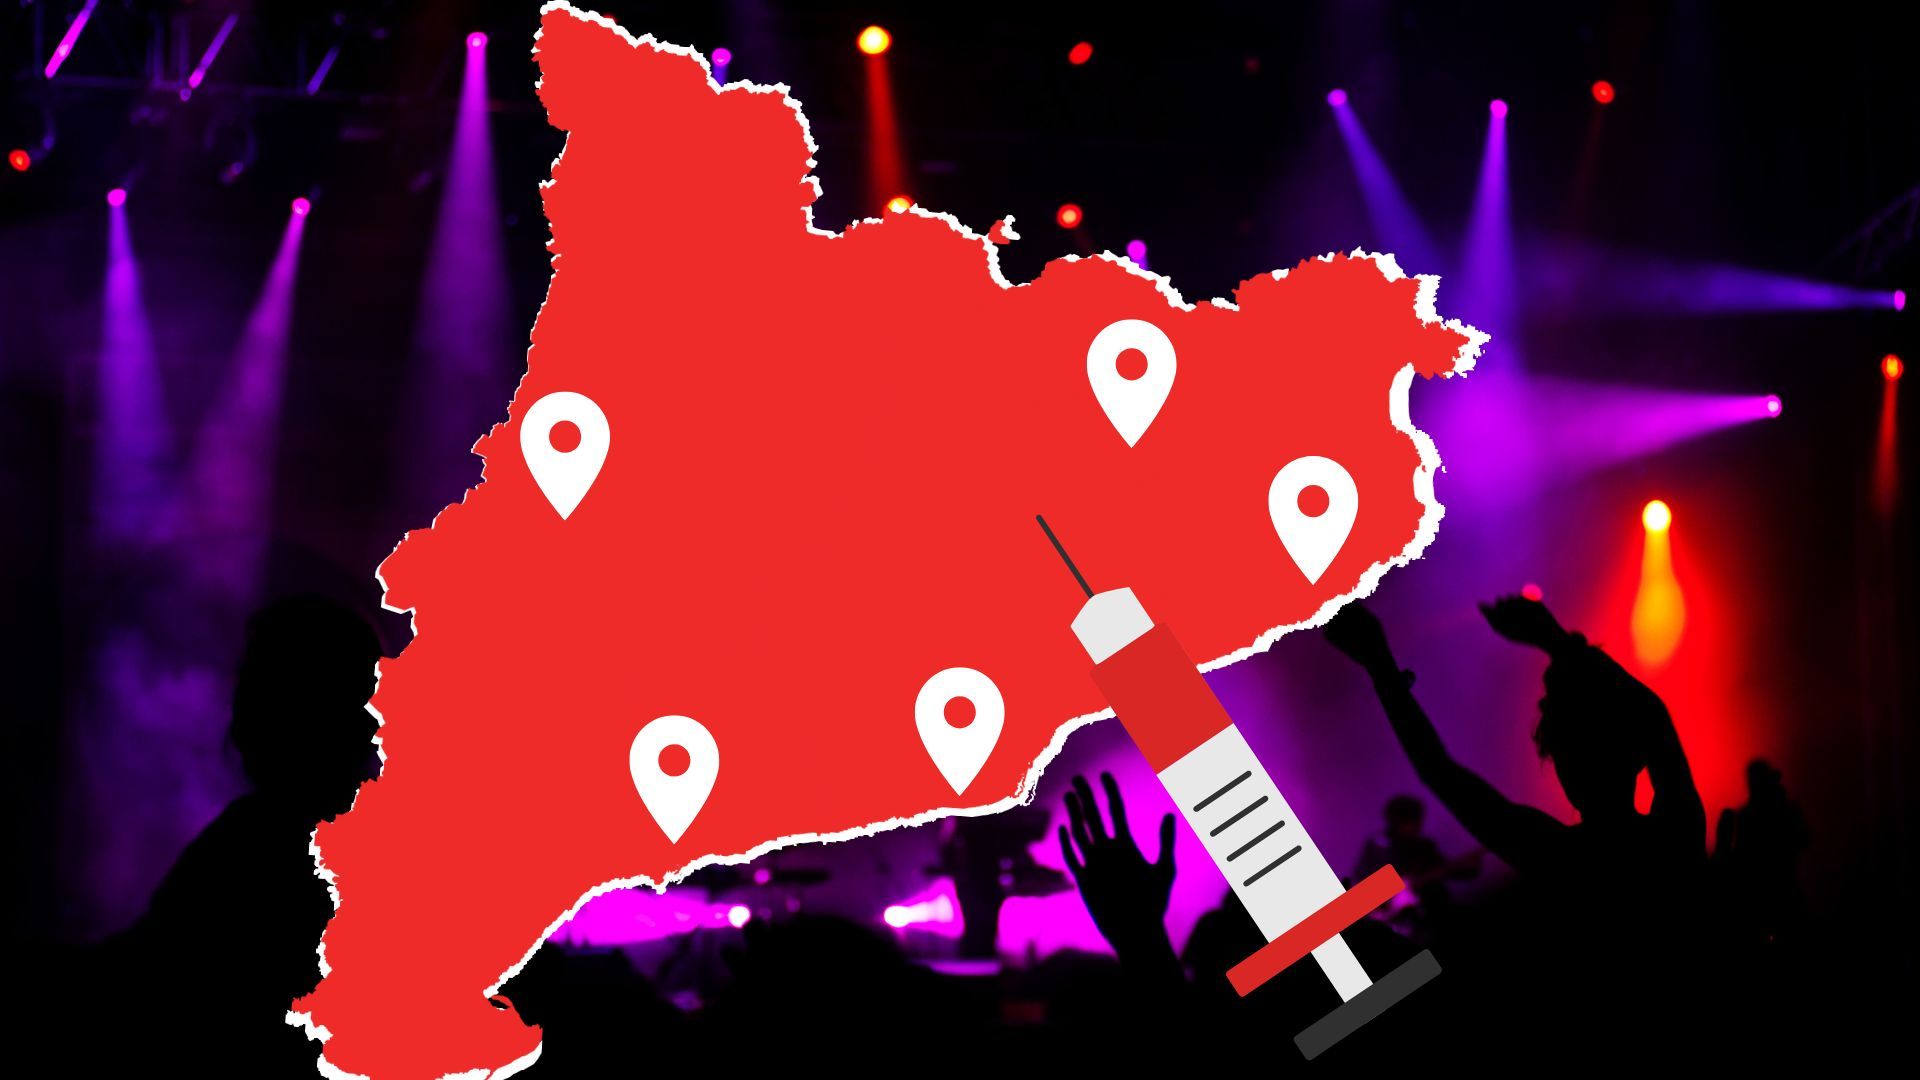 MAP | Needle spiking in Catalonia's dance clubs: where have cases been reported?